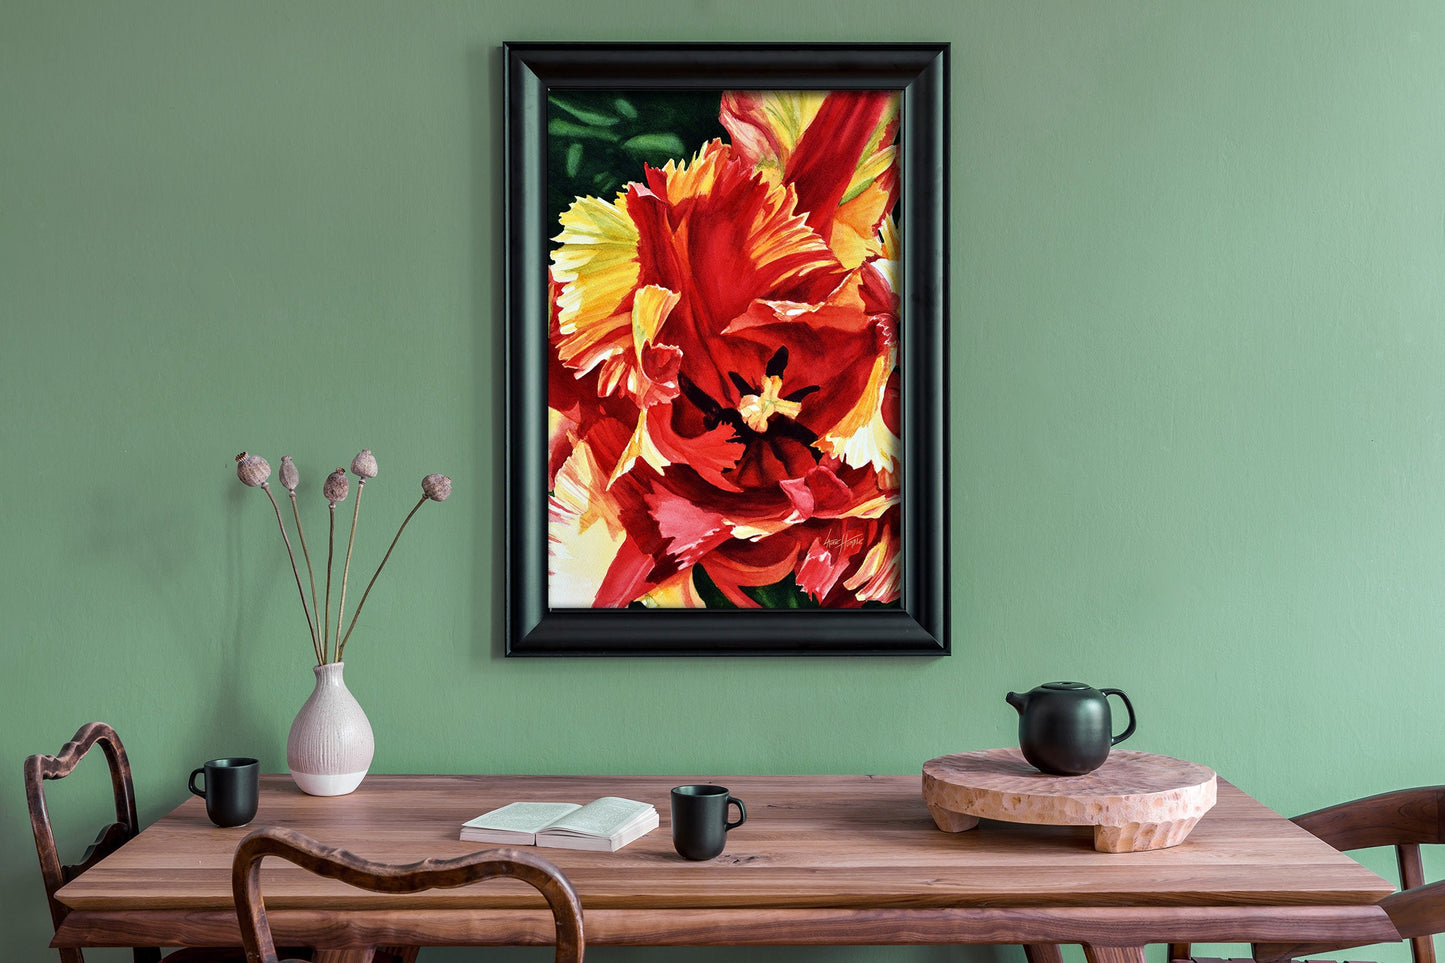 Framed Wall Art, Tulip Painting, Canvas Print, Floral Wall Art, Gift For Her, Bedroom Wall Art, Art Prints